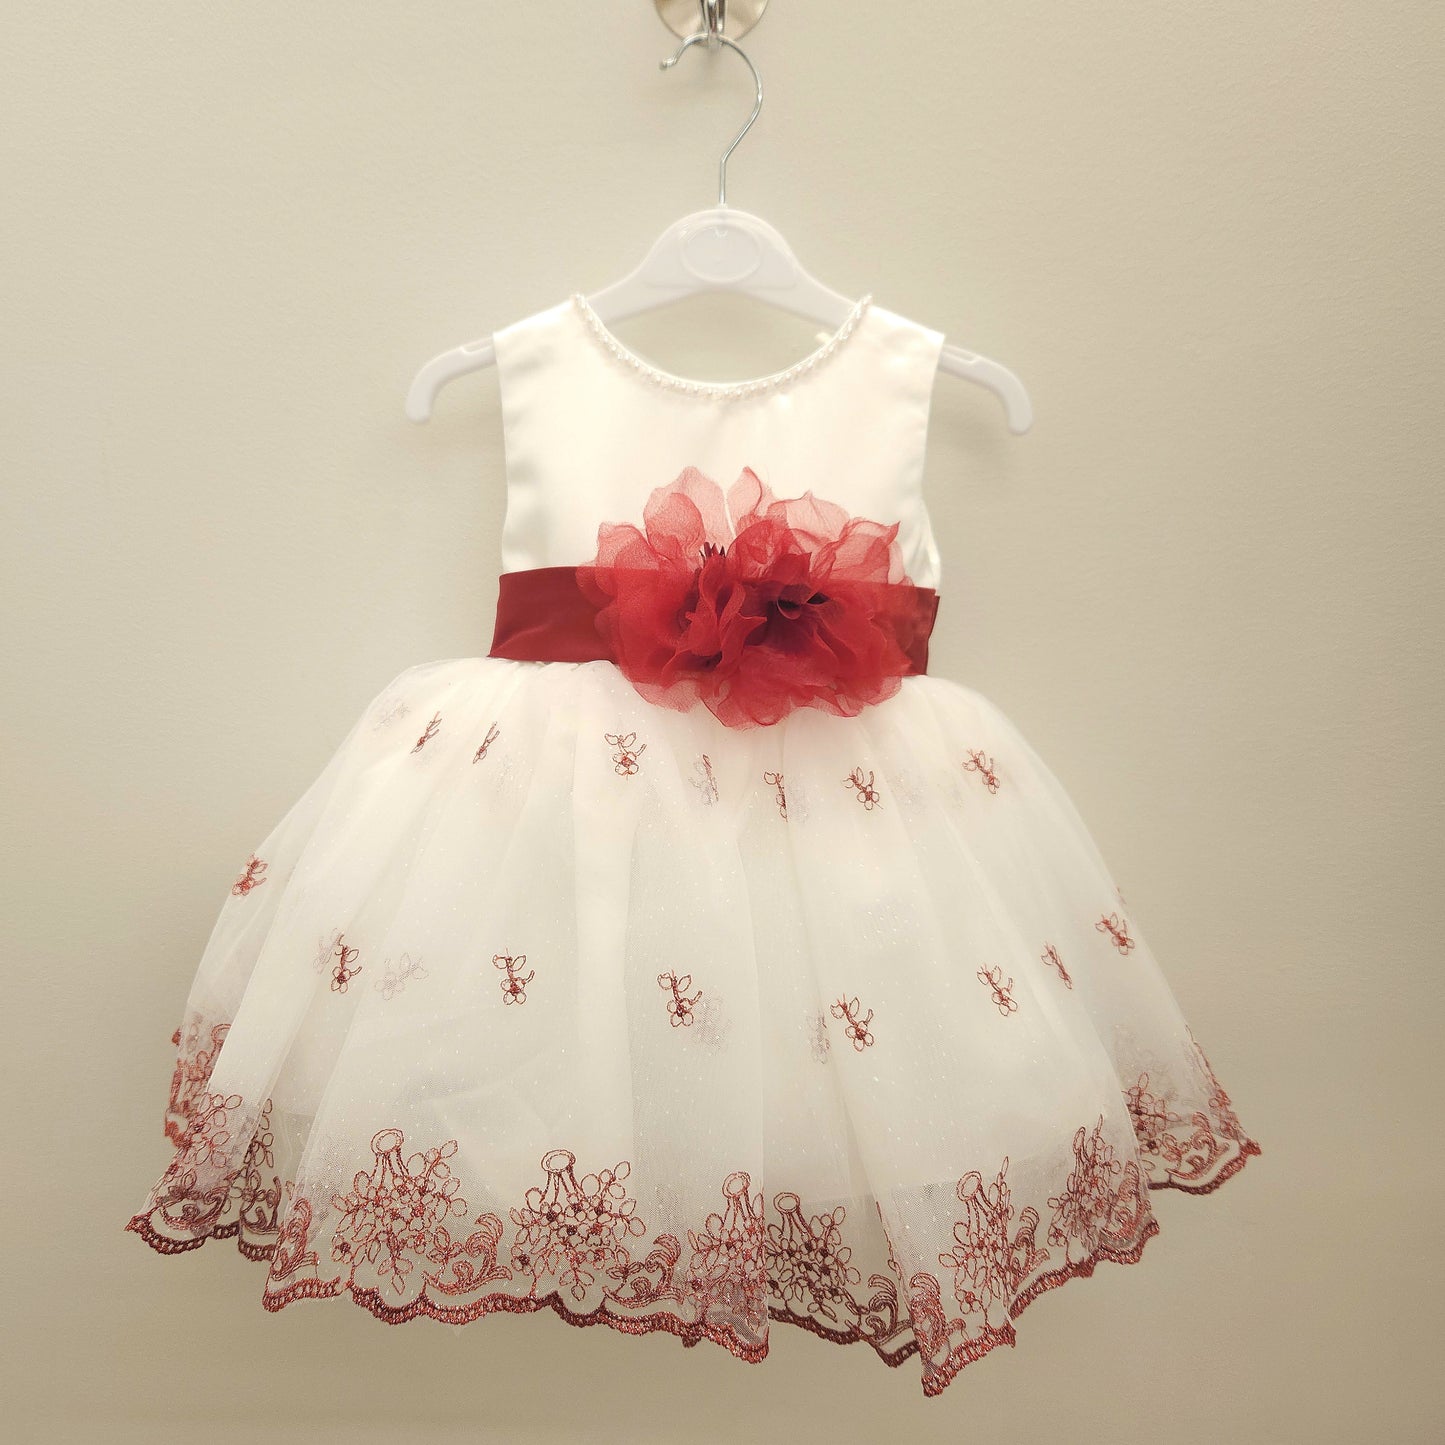 Chiffon flower with floral embroidery maroon dress